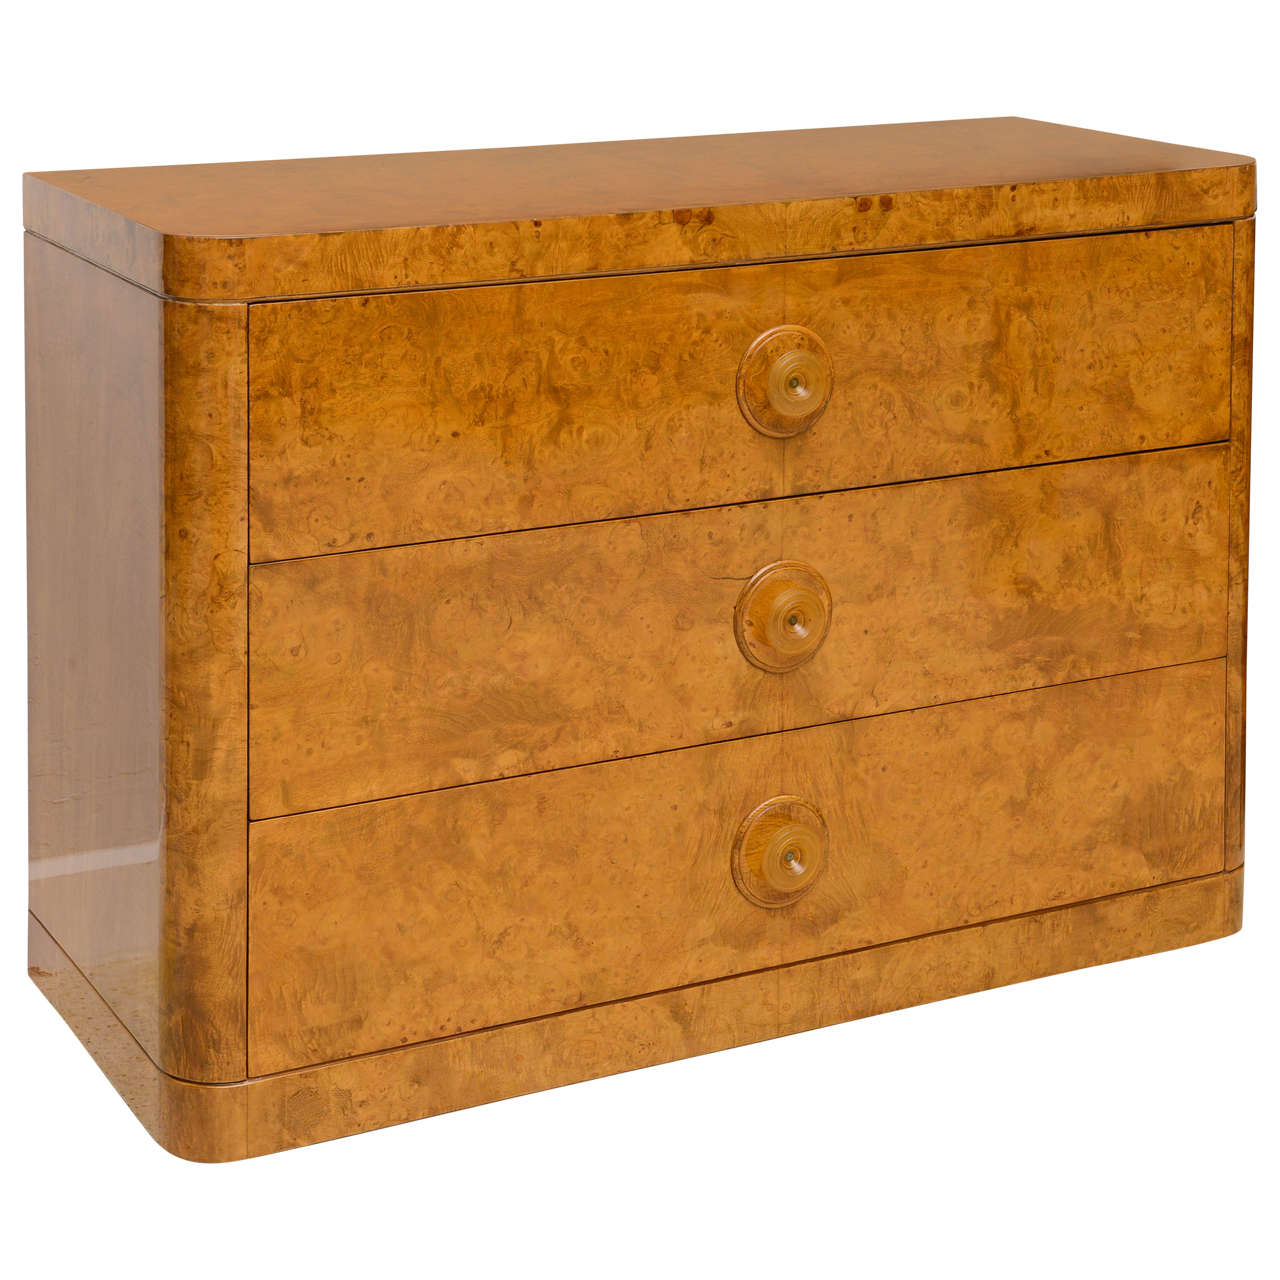 Late Art Deco Burl Birch, Three-Drawer Commode Attributed to Donald Deskey For Sale